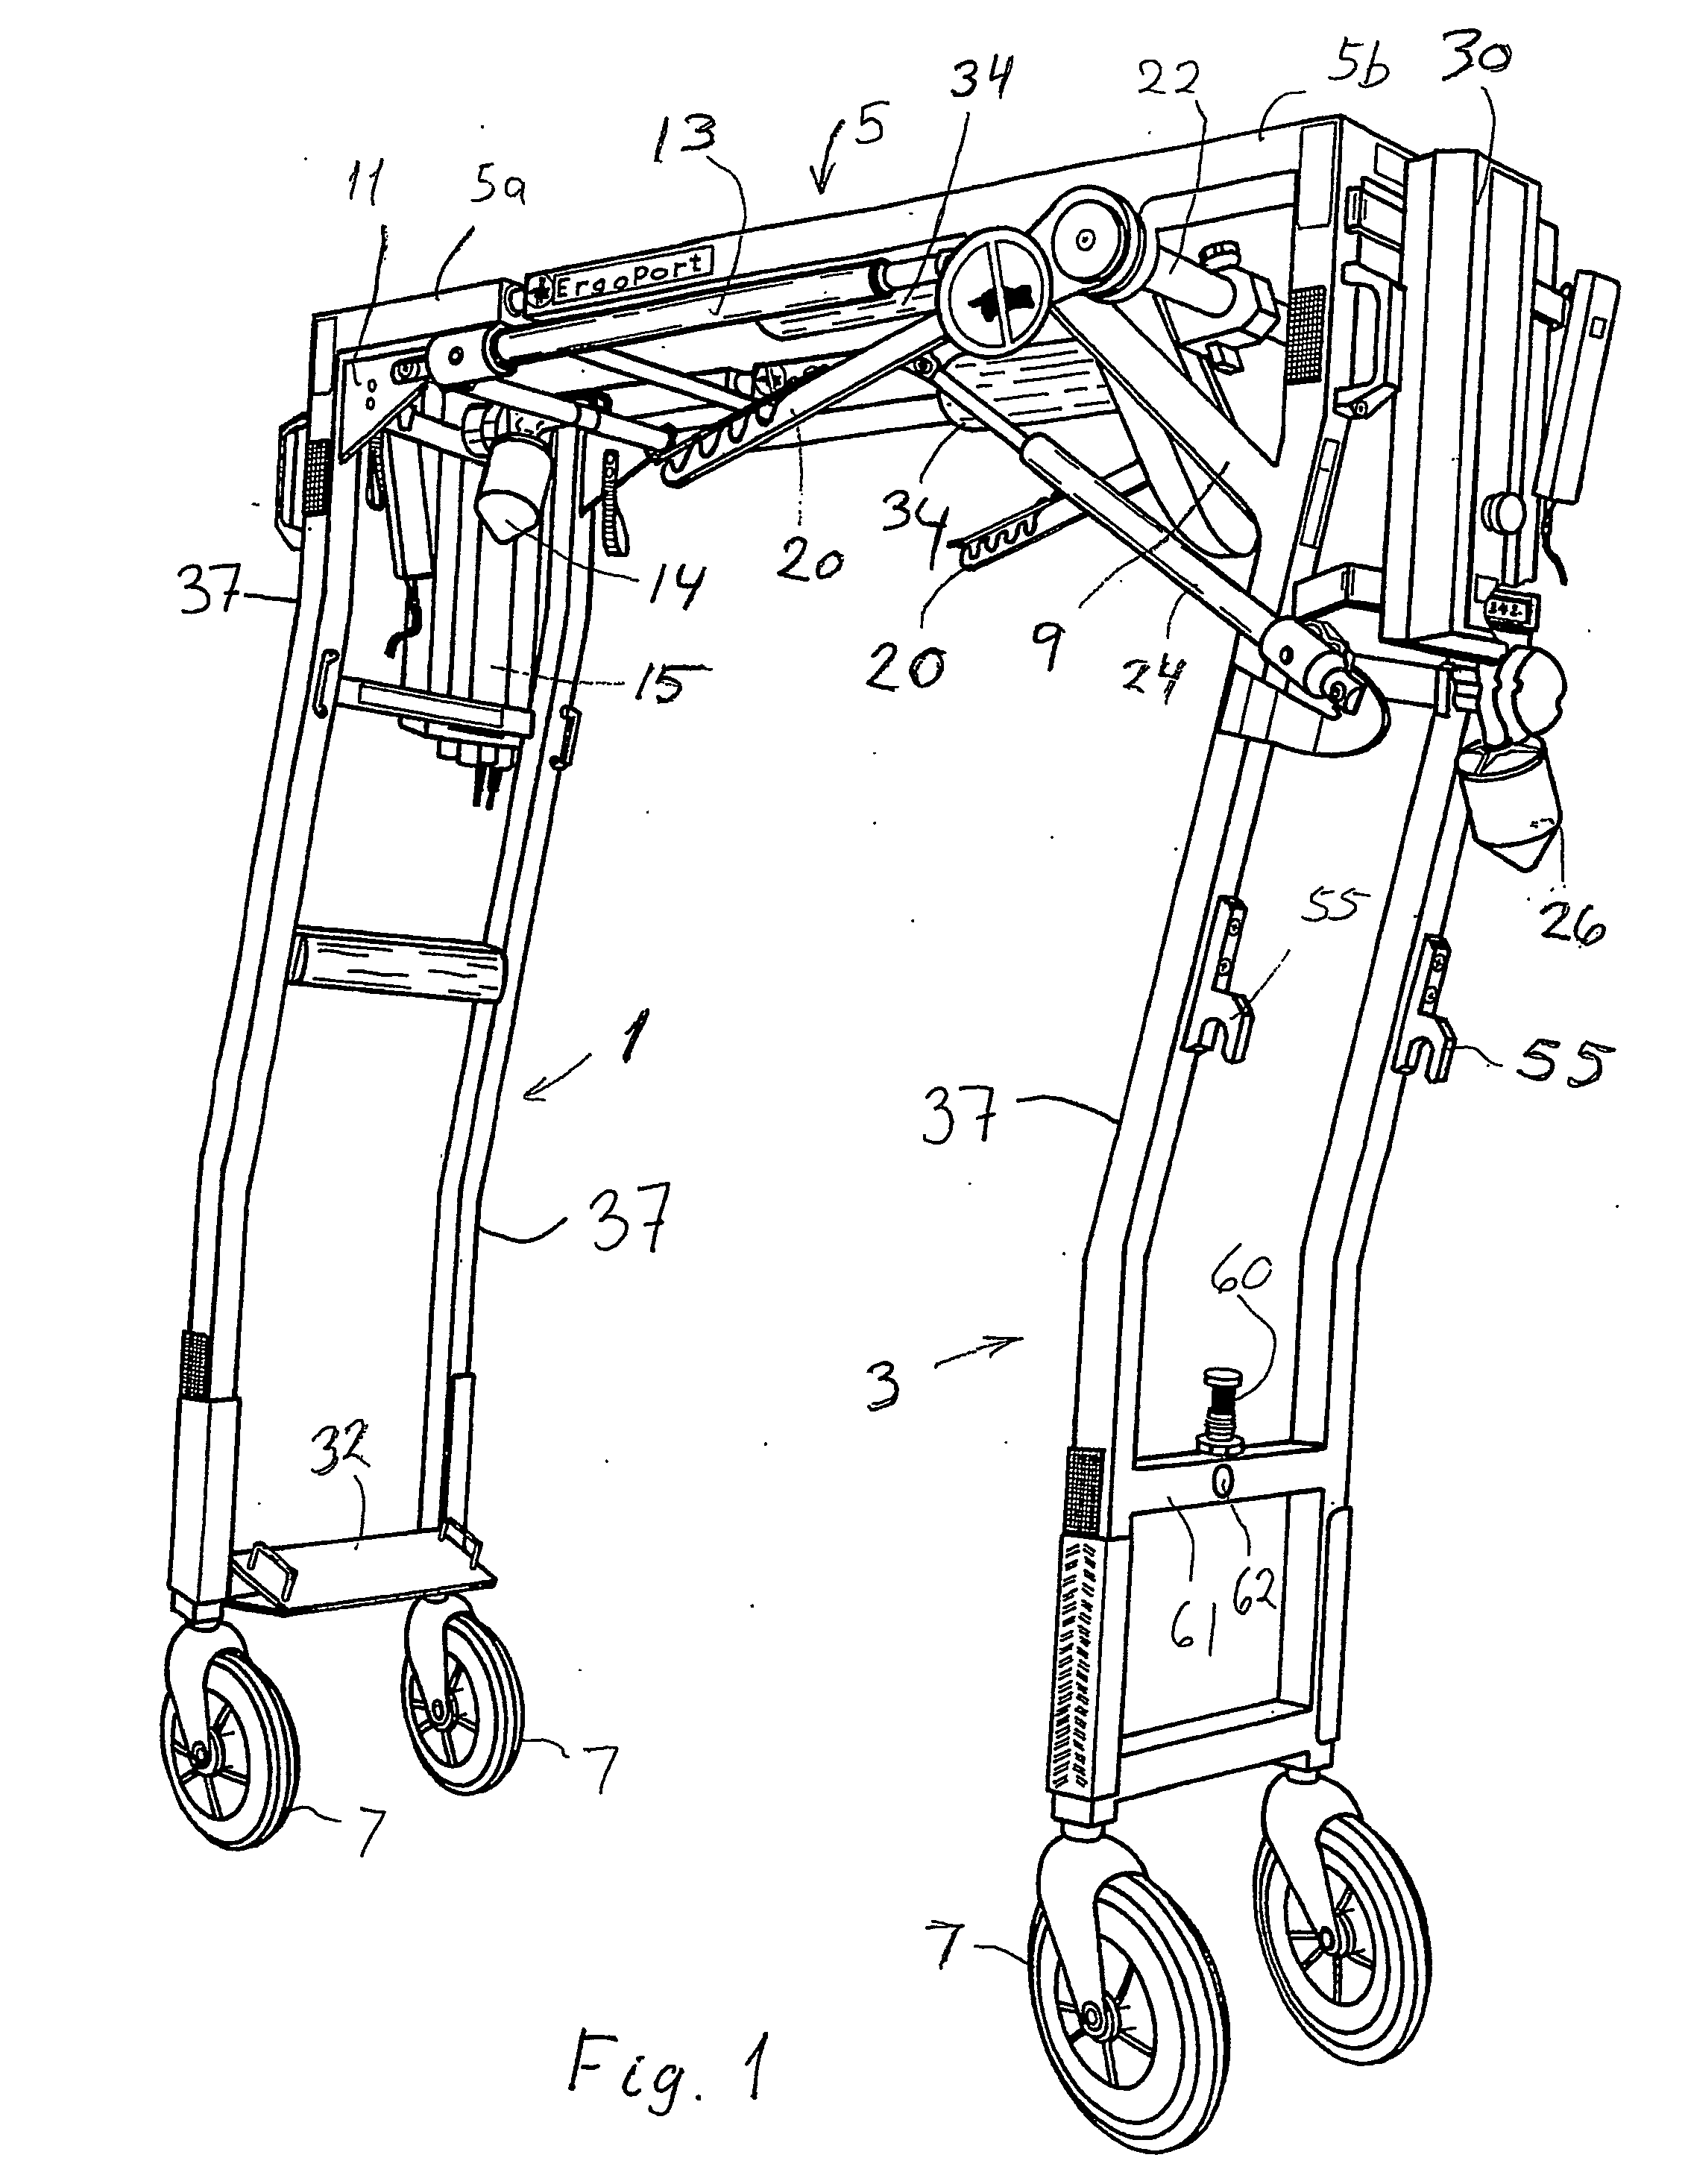 Hoisting and transporting apparatus for disabled persons